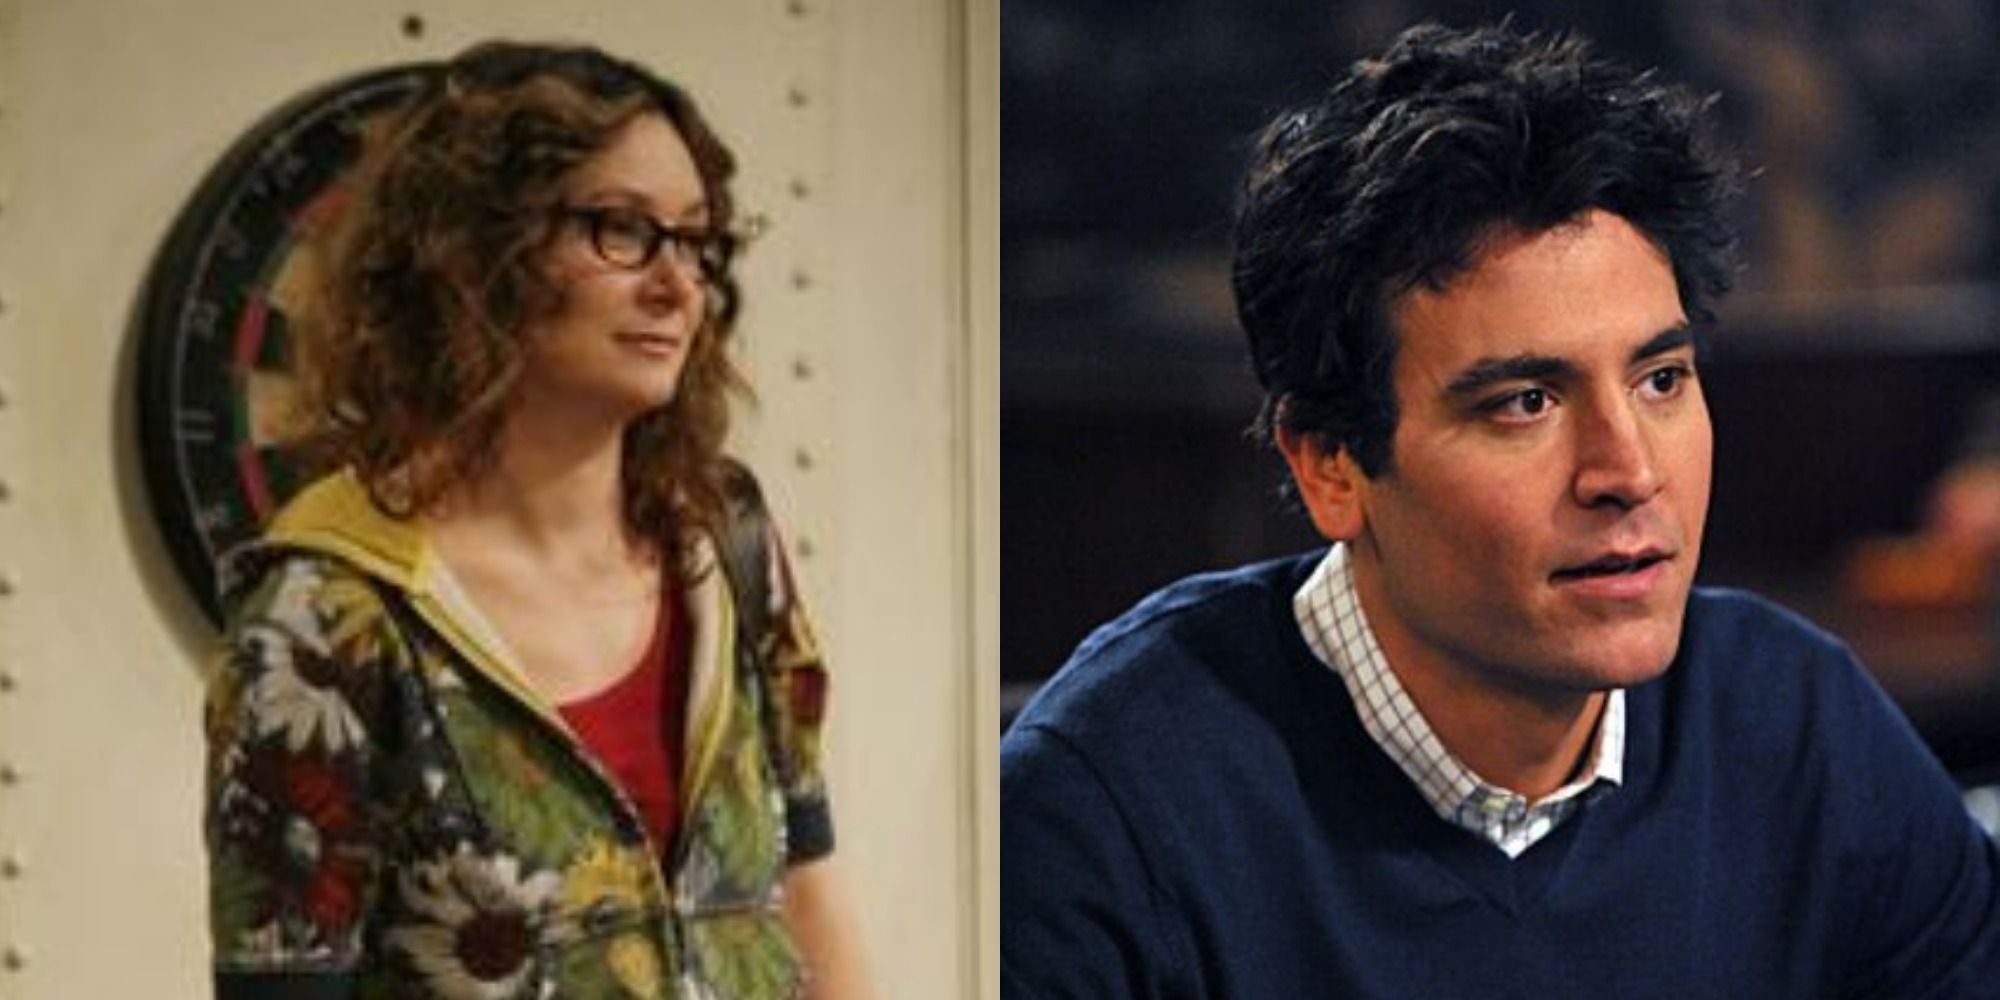 A split-screen image showing The Big Bang Theory's Leslie Winkle and How I Met Your Mother's Ted Mosby